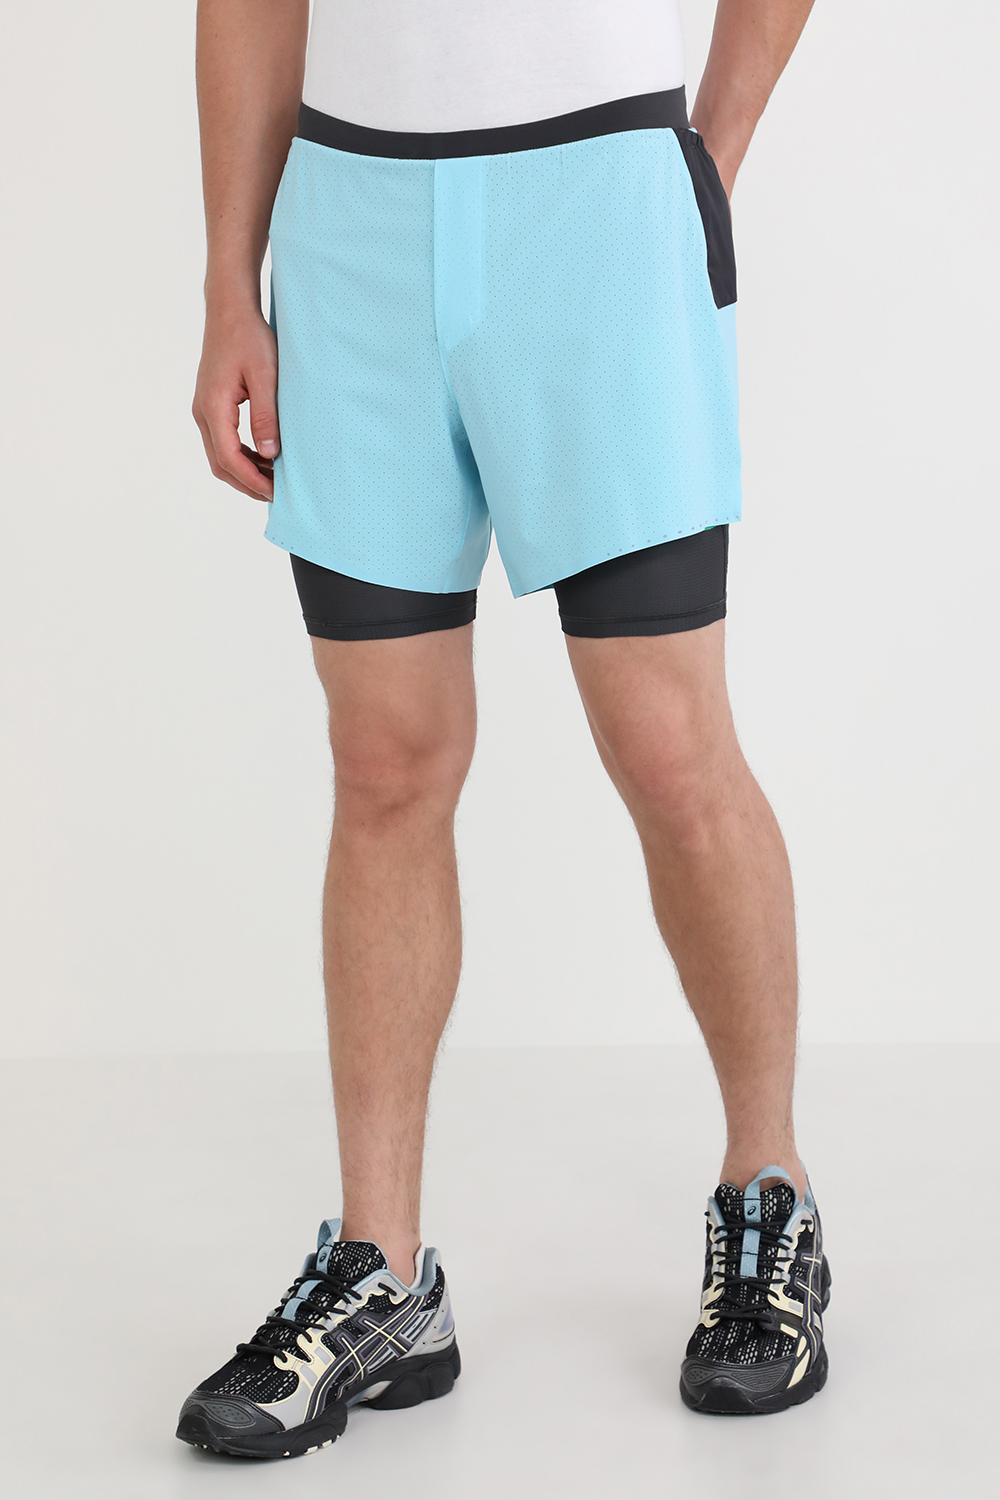 Fast and Free Road to Trail Lined Short 6" LULULEMON